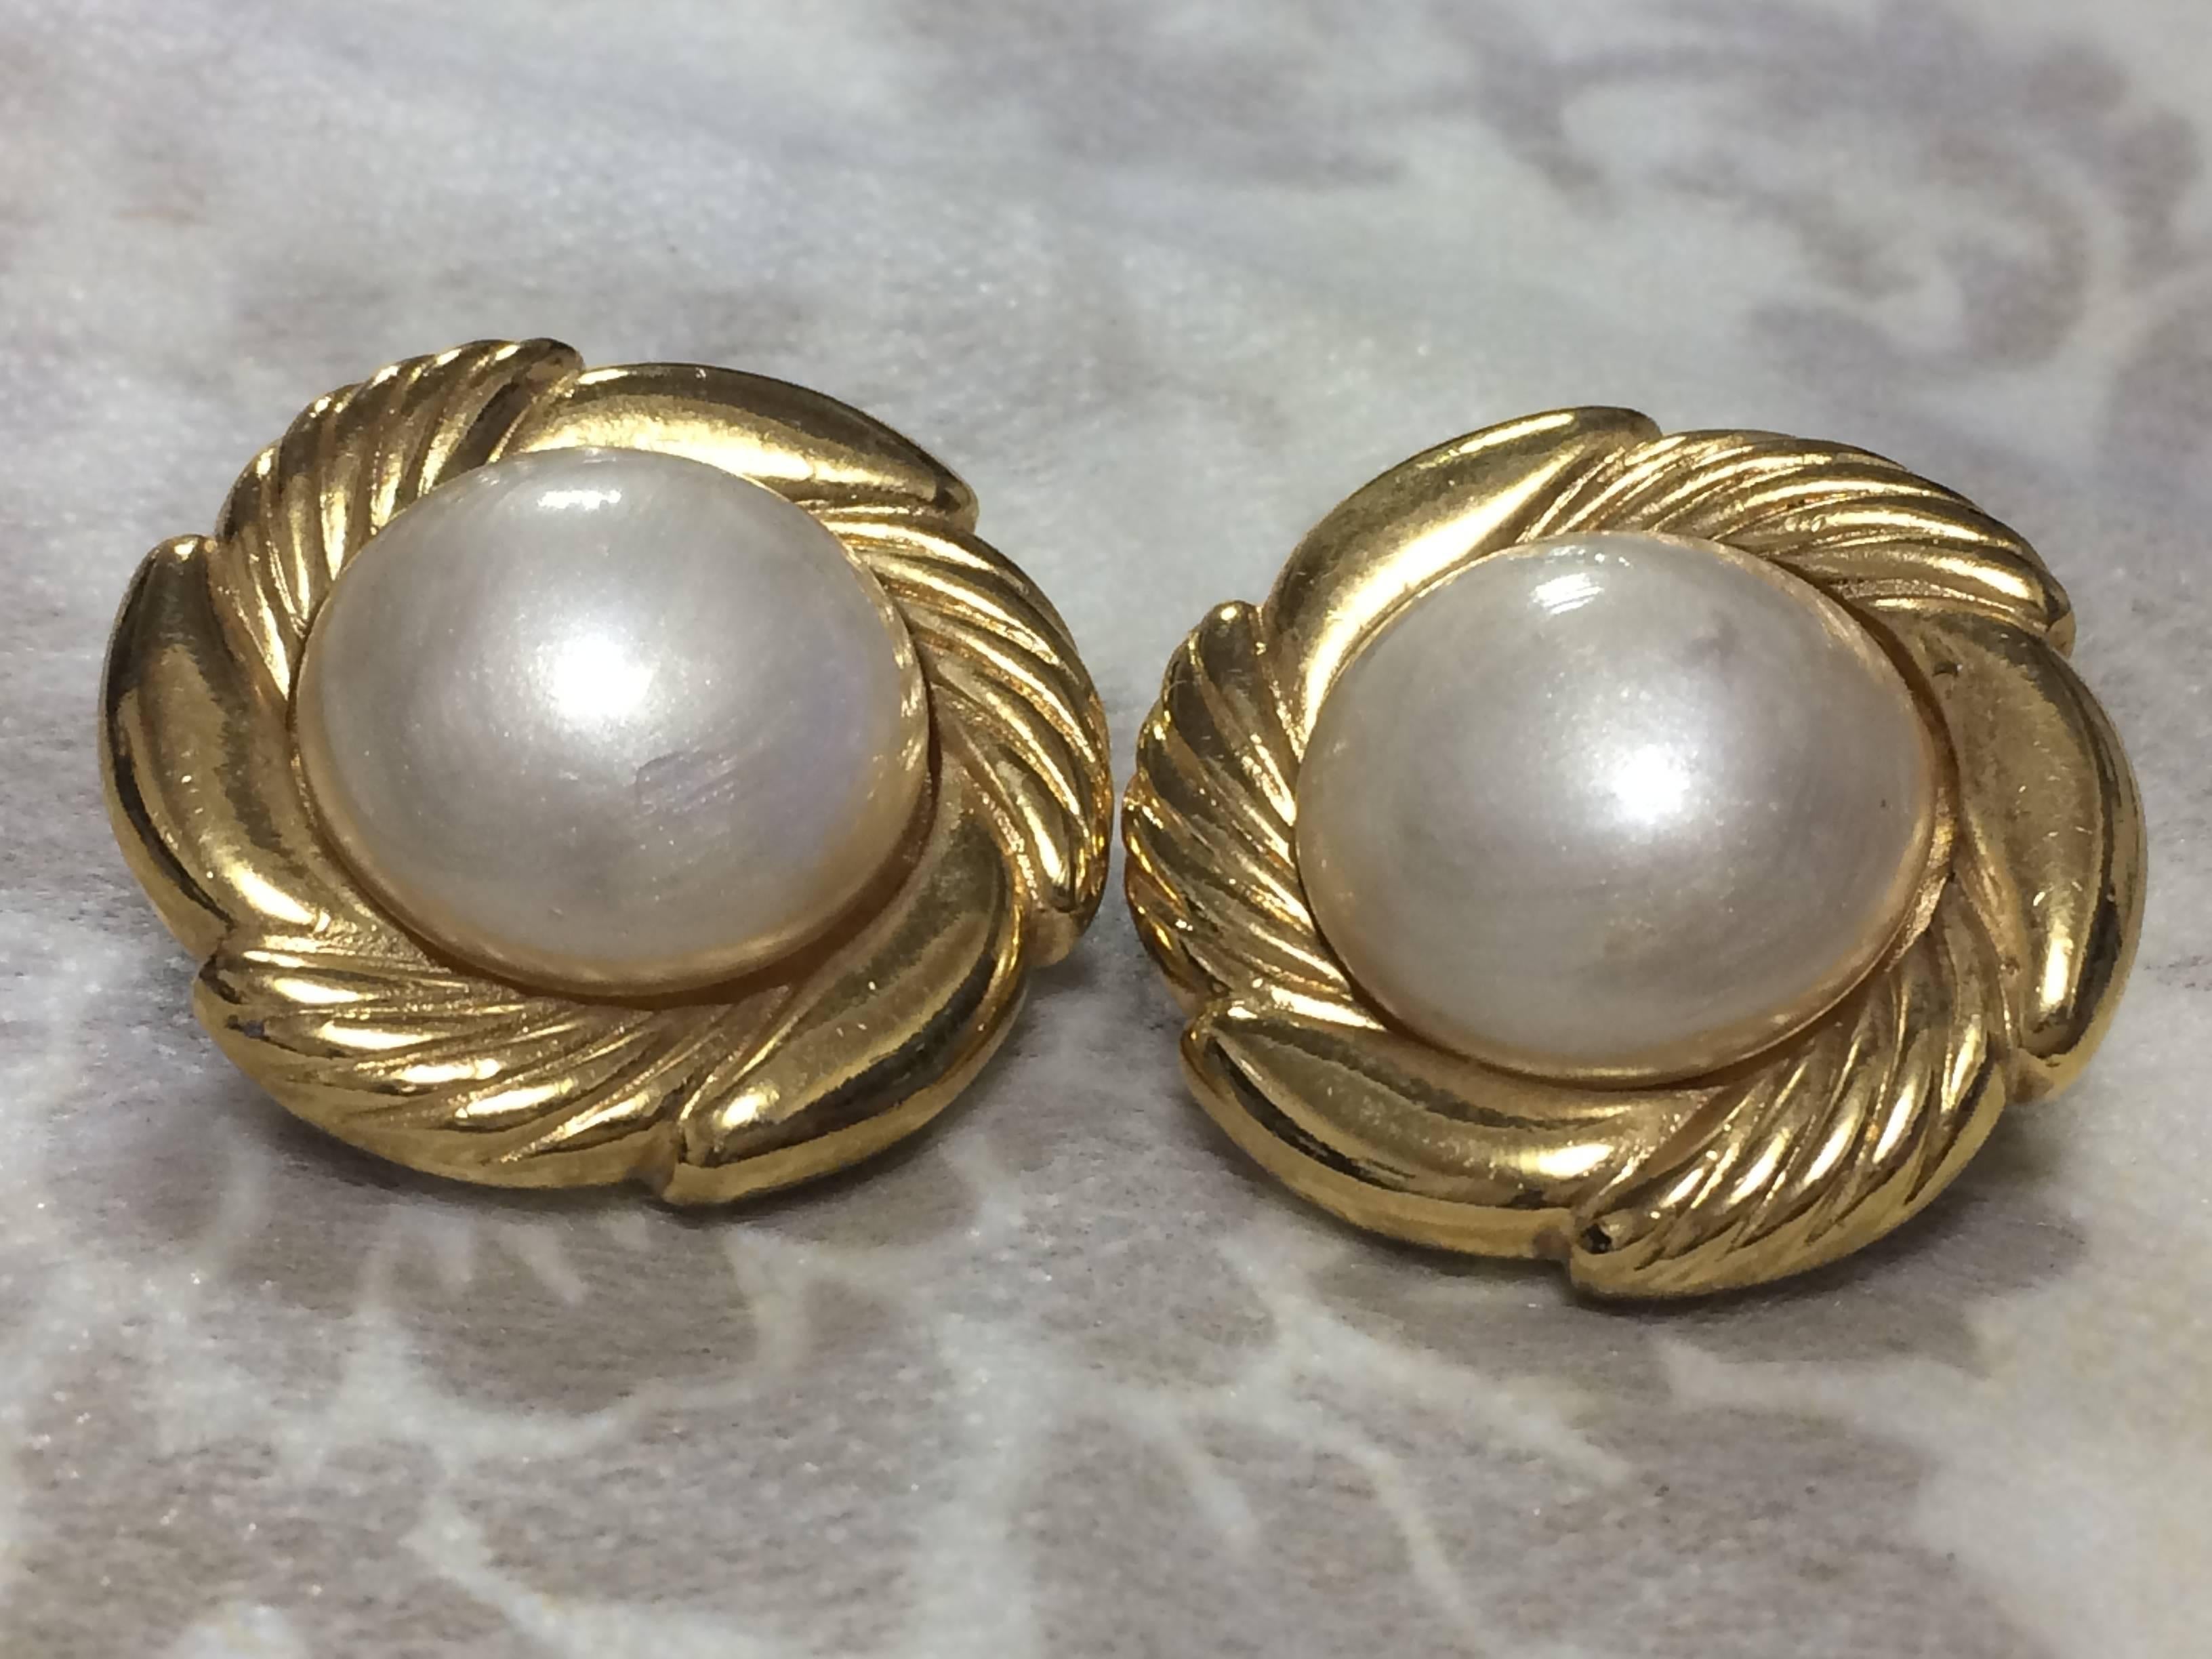 1990s. Vintage CHANEL golden round faux pearl earrings in flower design frame. Classic and simple earrings.

Here are vintage CHANEL classic and simple faux round pearl earrings. 

These simple and elegant earrings in a flower design would never